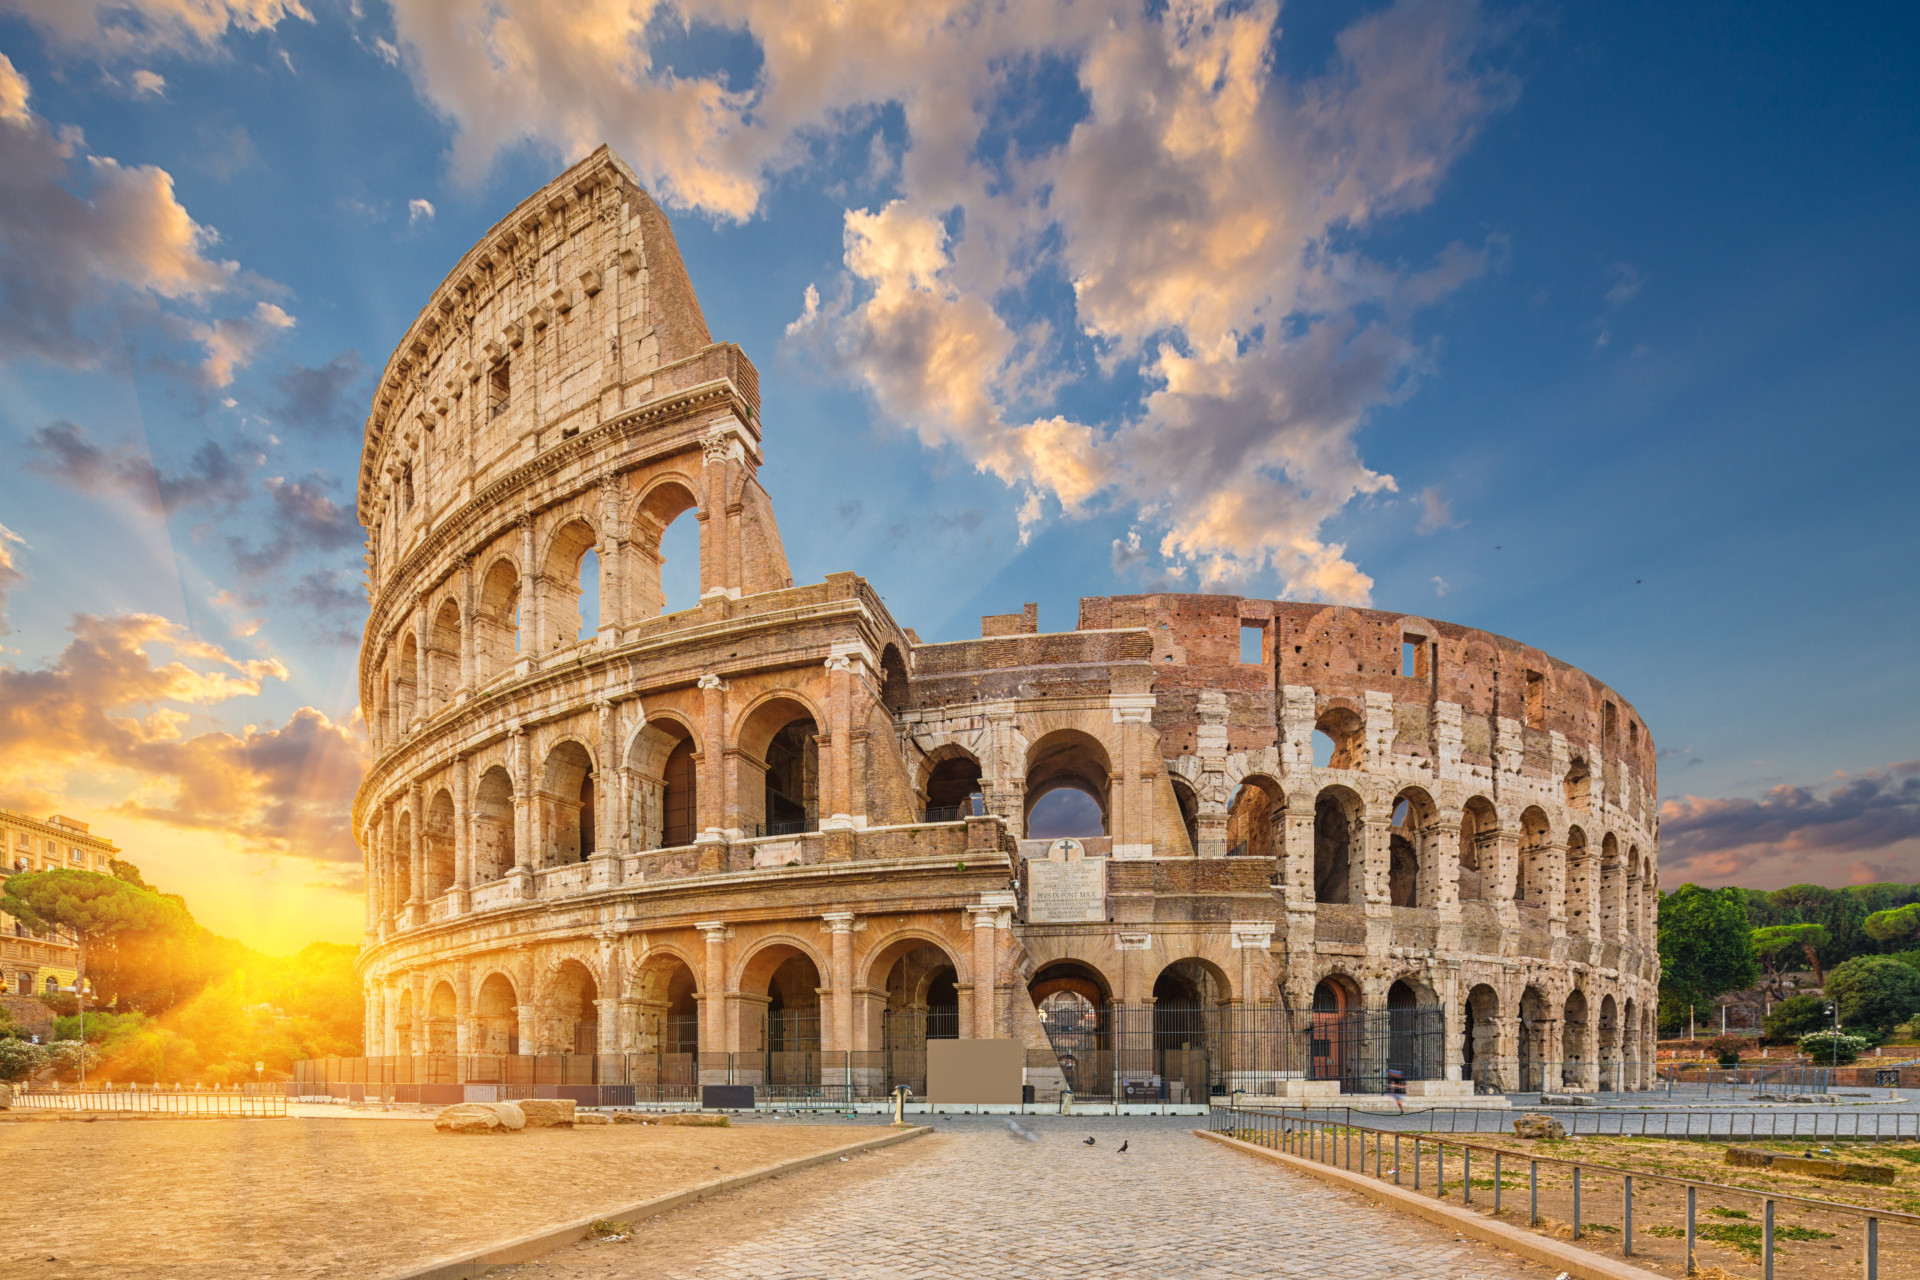 Rome is a great city to see on foot. In the center of the city you can see the Colosseum and then take a short stroll to the Roman Forum.<p><a href="https://www.msn.com/en-sg/community/channel/vid-7xx8mnucu55yw63we9va2gwr7uihbxwc68fxqp25x6tg4ftibpra?cvid=94631541bc0f4f89bfd59158d696ad7e">Follow us and access great exclusive content every day</a></p>